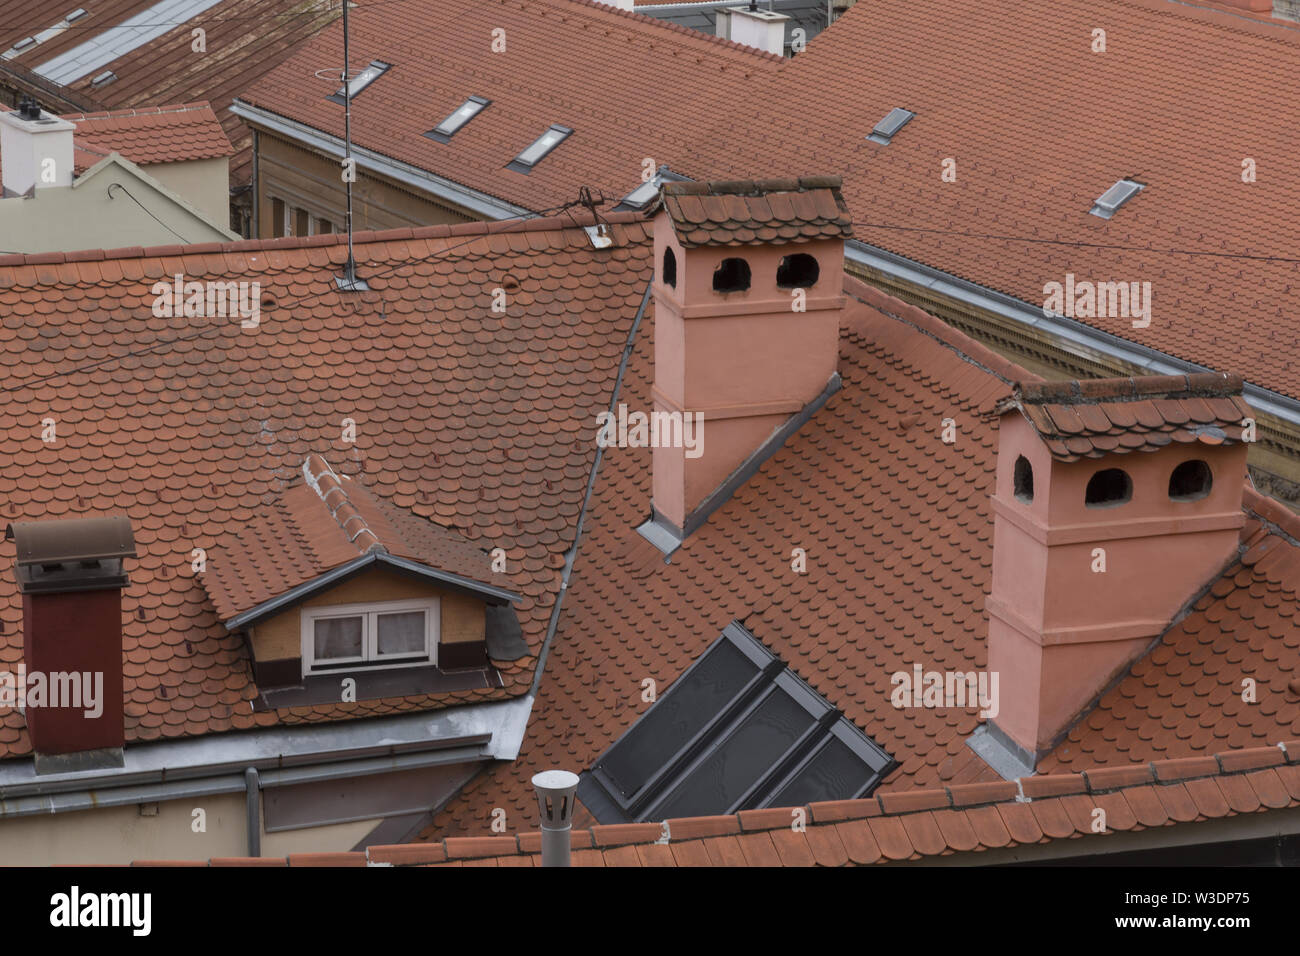 Roofs with red tiles Stock Photo